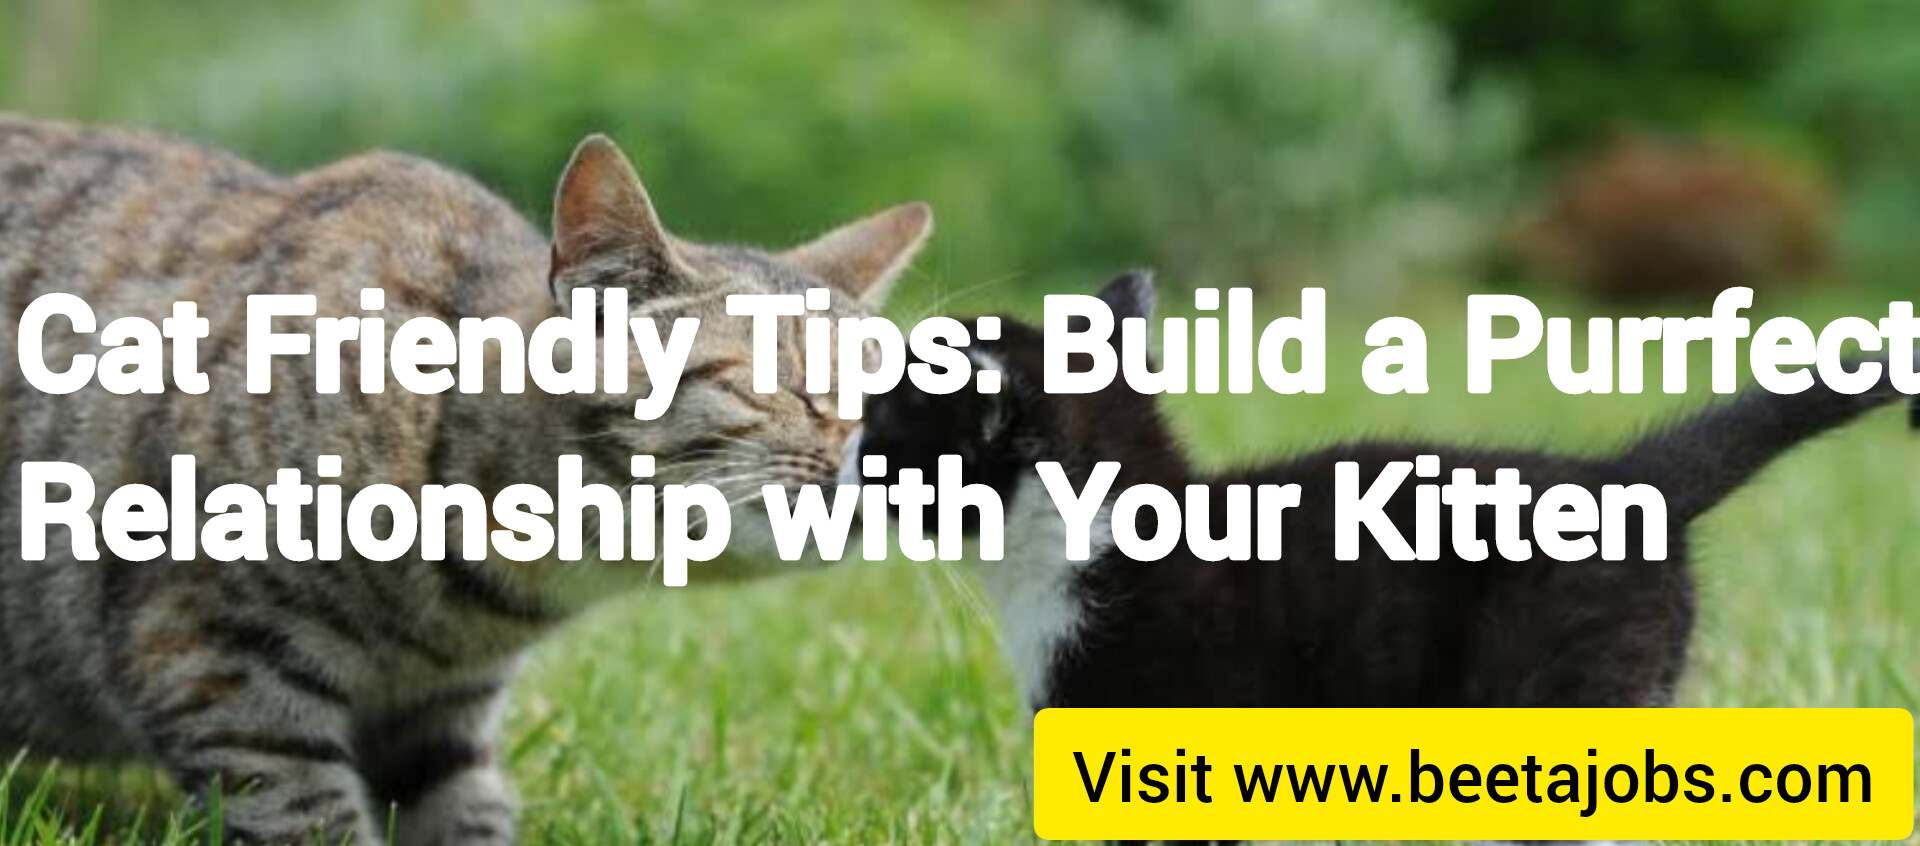 Cat Friendly Tips: Build a Perfect Relationship with Your Kitten